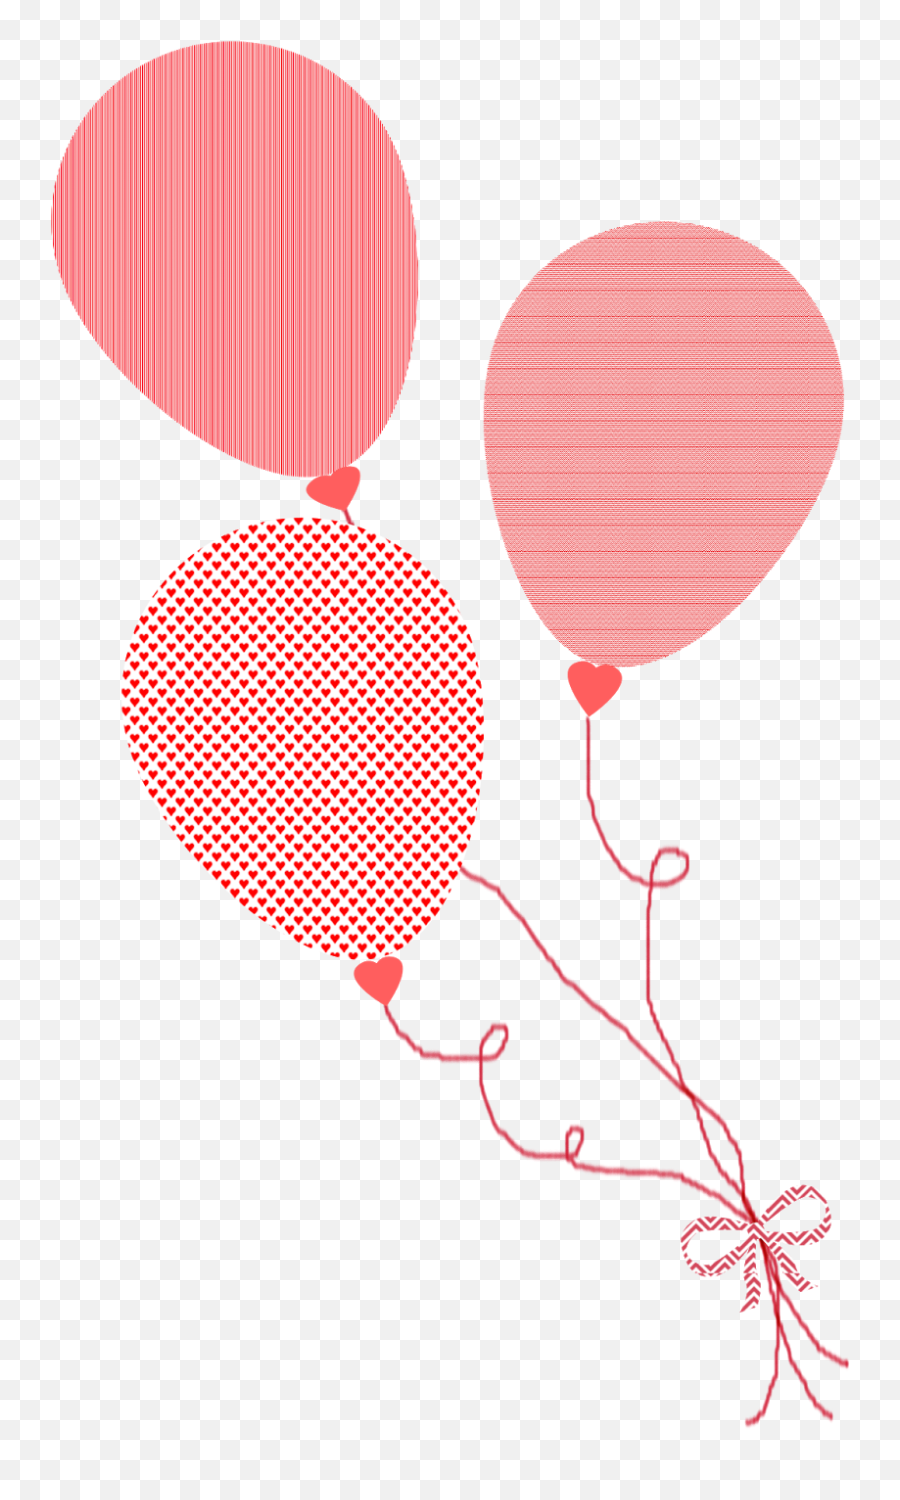 Download Balloons Cl - Balloon Drawing Png Transparent,Balloons With Transparent Background